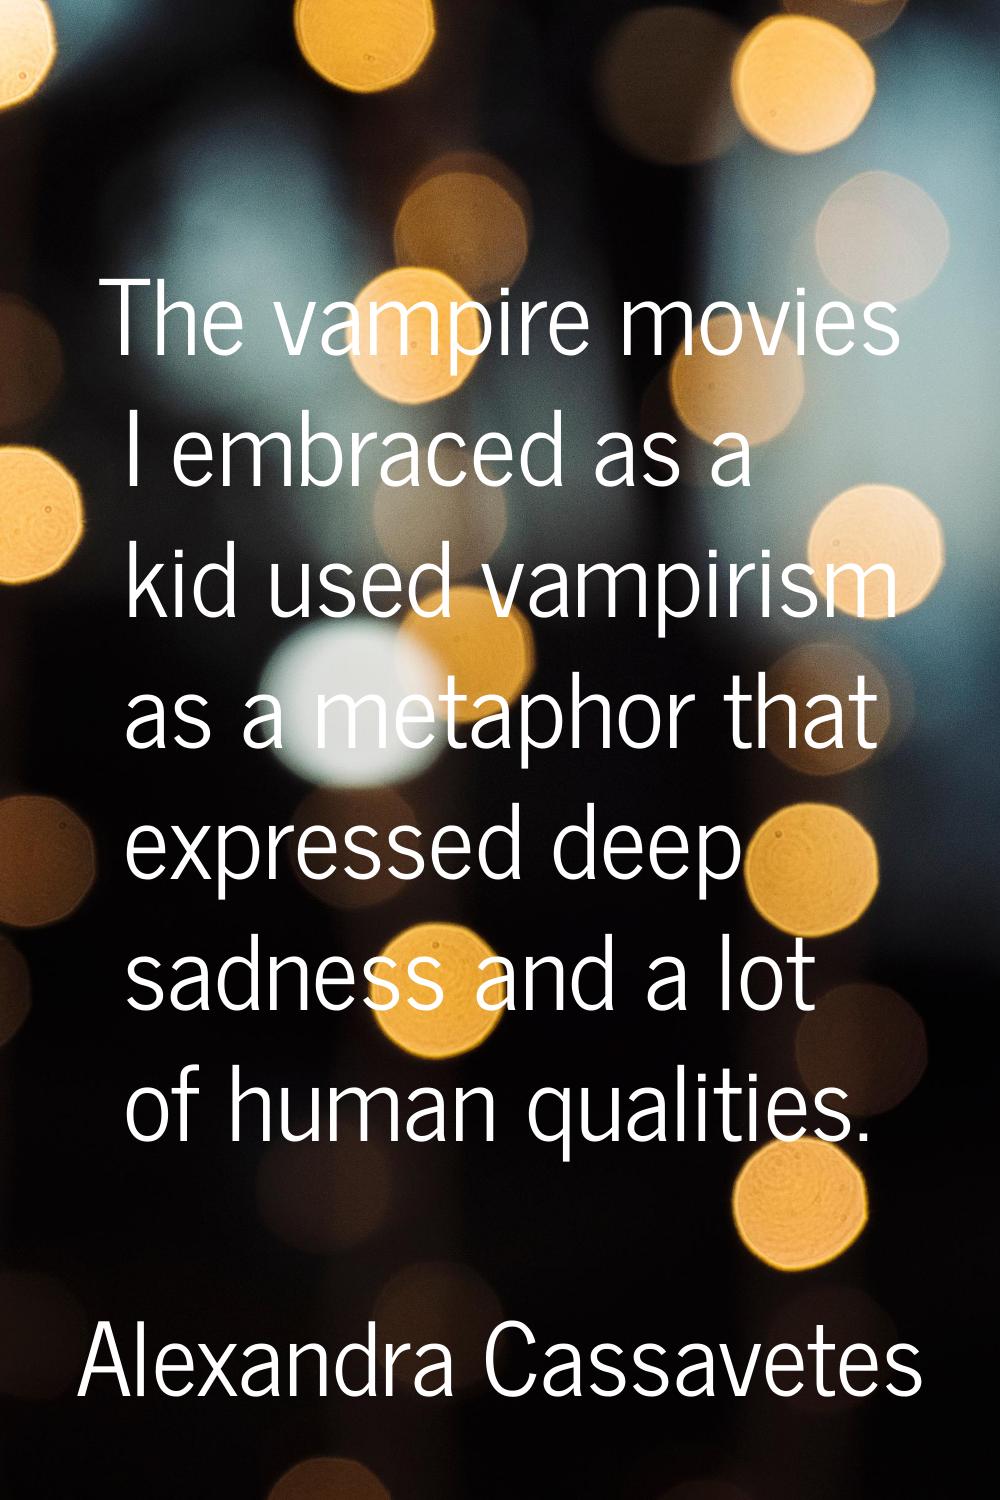 The vampire movies I embraced as a kid used vampirism as a metaphor that expressed deep sadness and